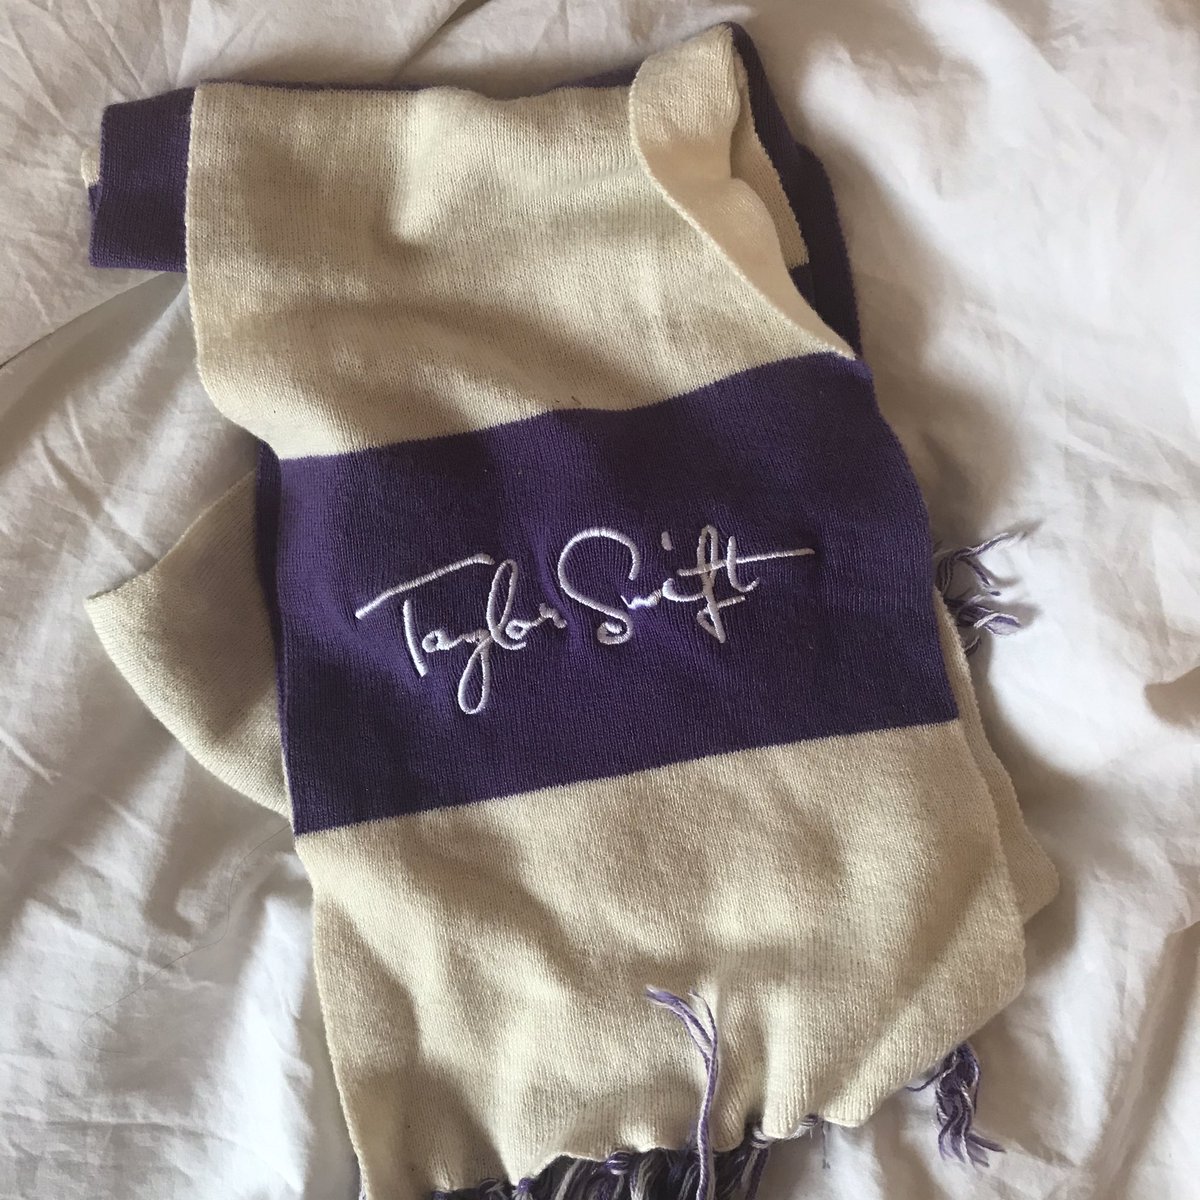 in 2011 y’all were begging to have a Gryffindor scarf meanwhile we swifties would have died for this TS scarf